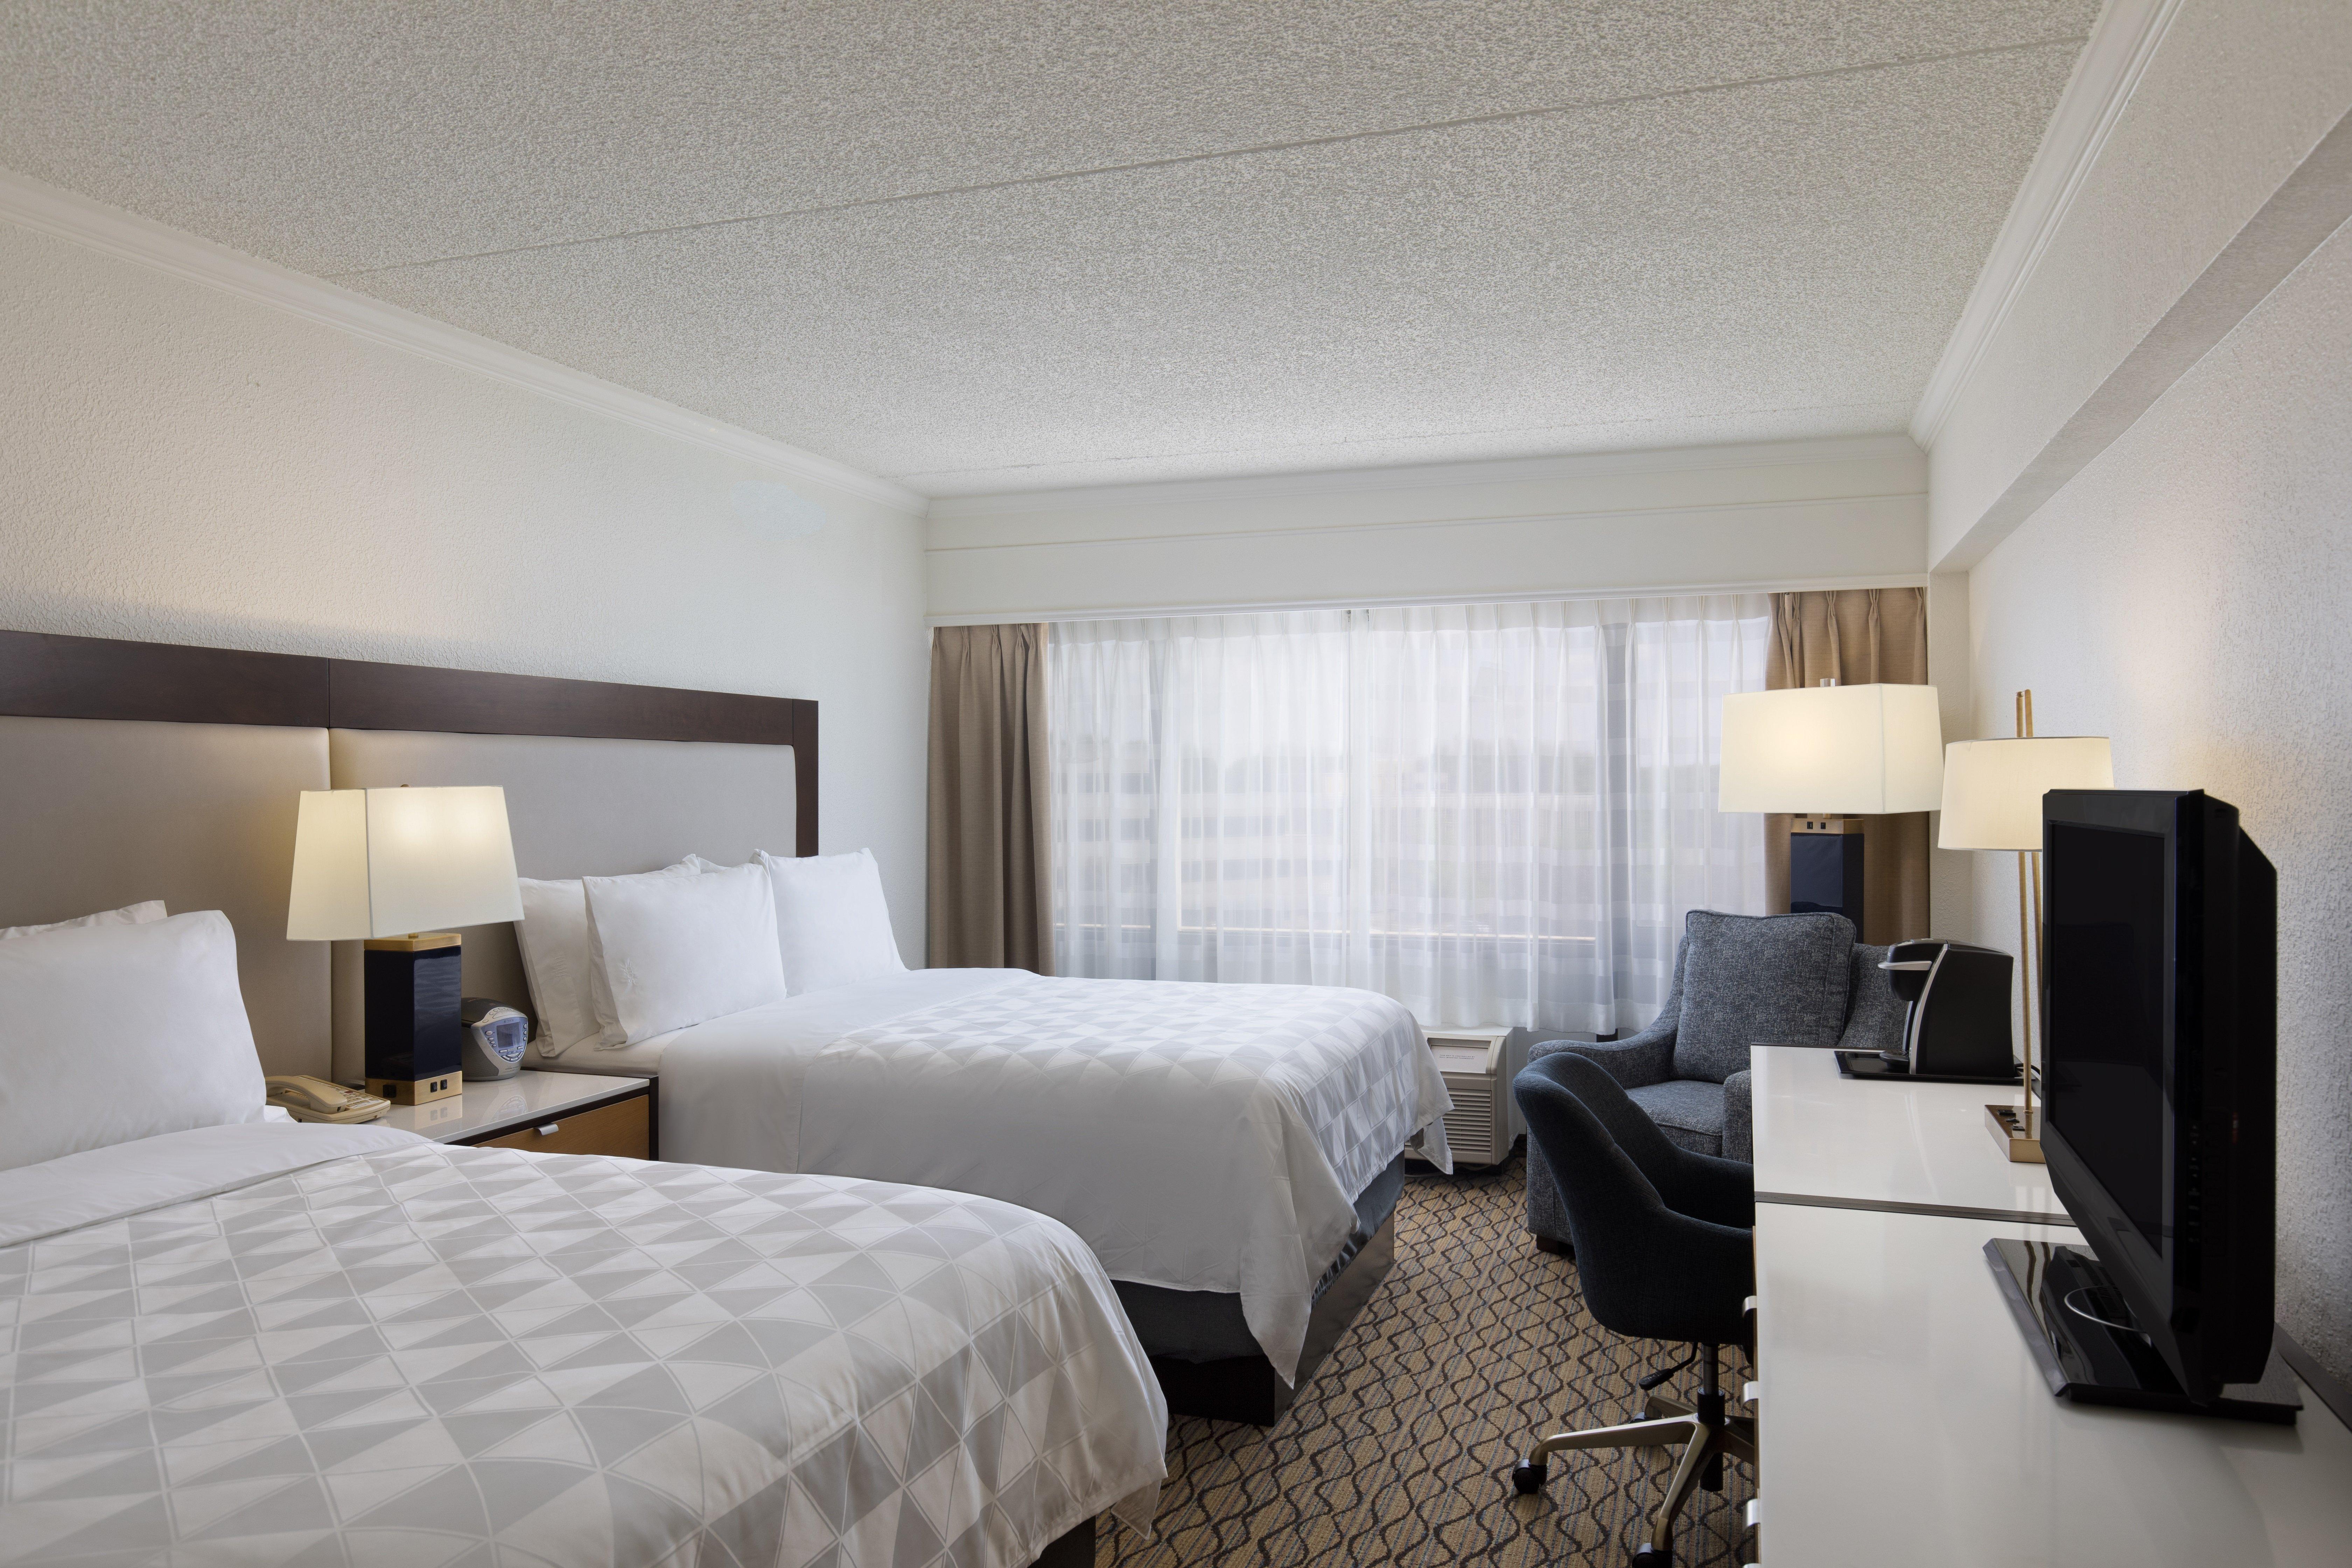 kruis Medic Controle HOTEL HOLIDAY INN CLARK - NEWARK AREA CLARK, NJ 4* (United States) - from  US$ 119 | BOOKED